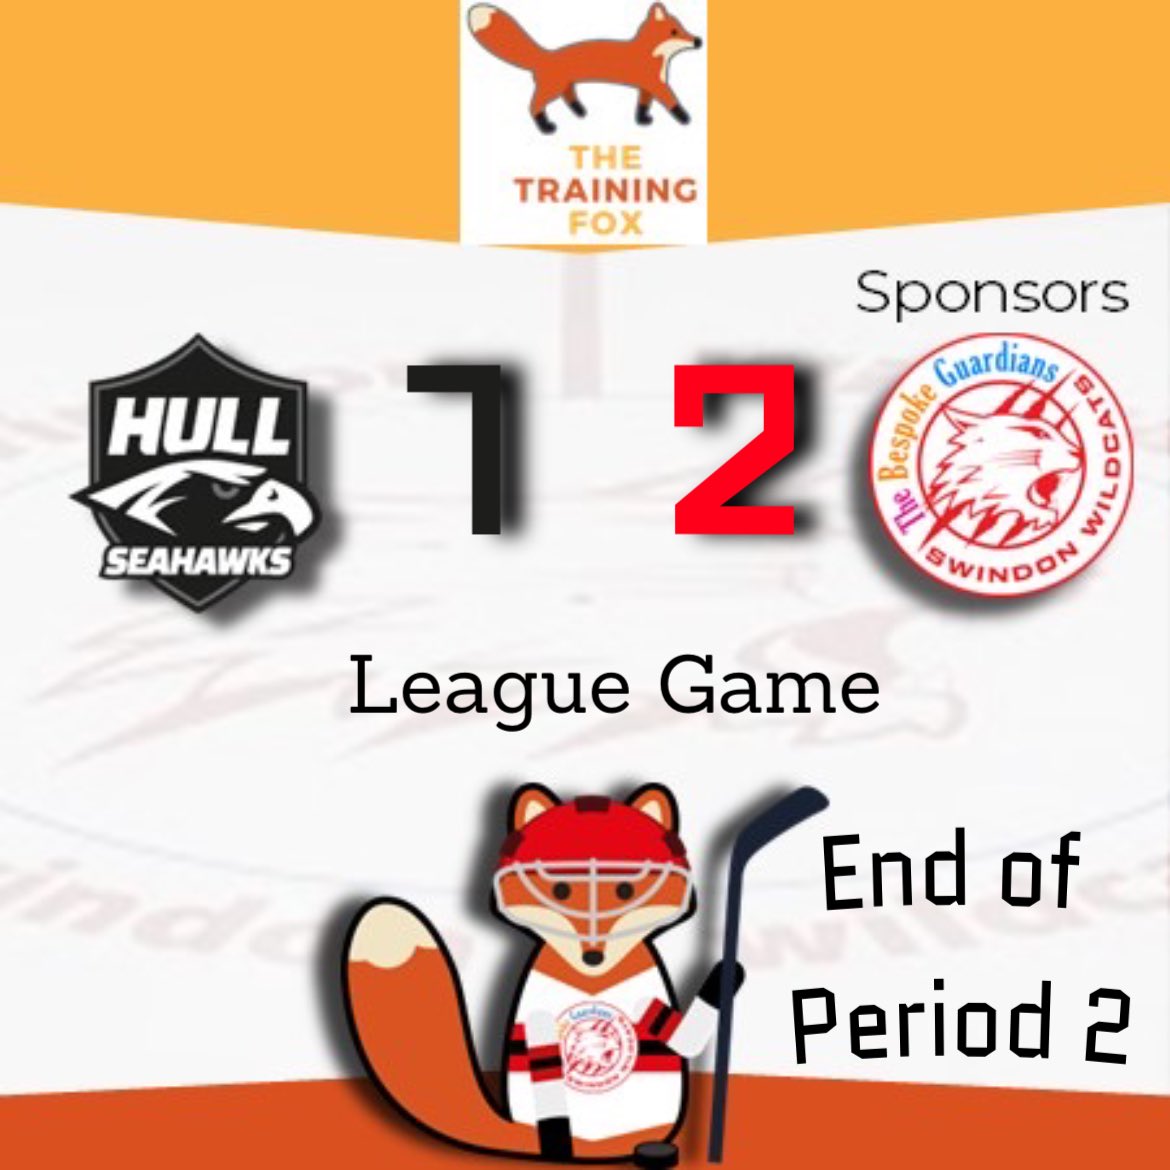 News has reached from #Hull and it sees the lead in tact for our @SwinWildcats against the @hullseahawks! 

#FoxWildcatFamily
#BringHomeTheWin
#LetsGoCats
#SeahawksCats